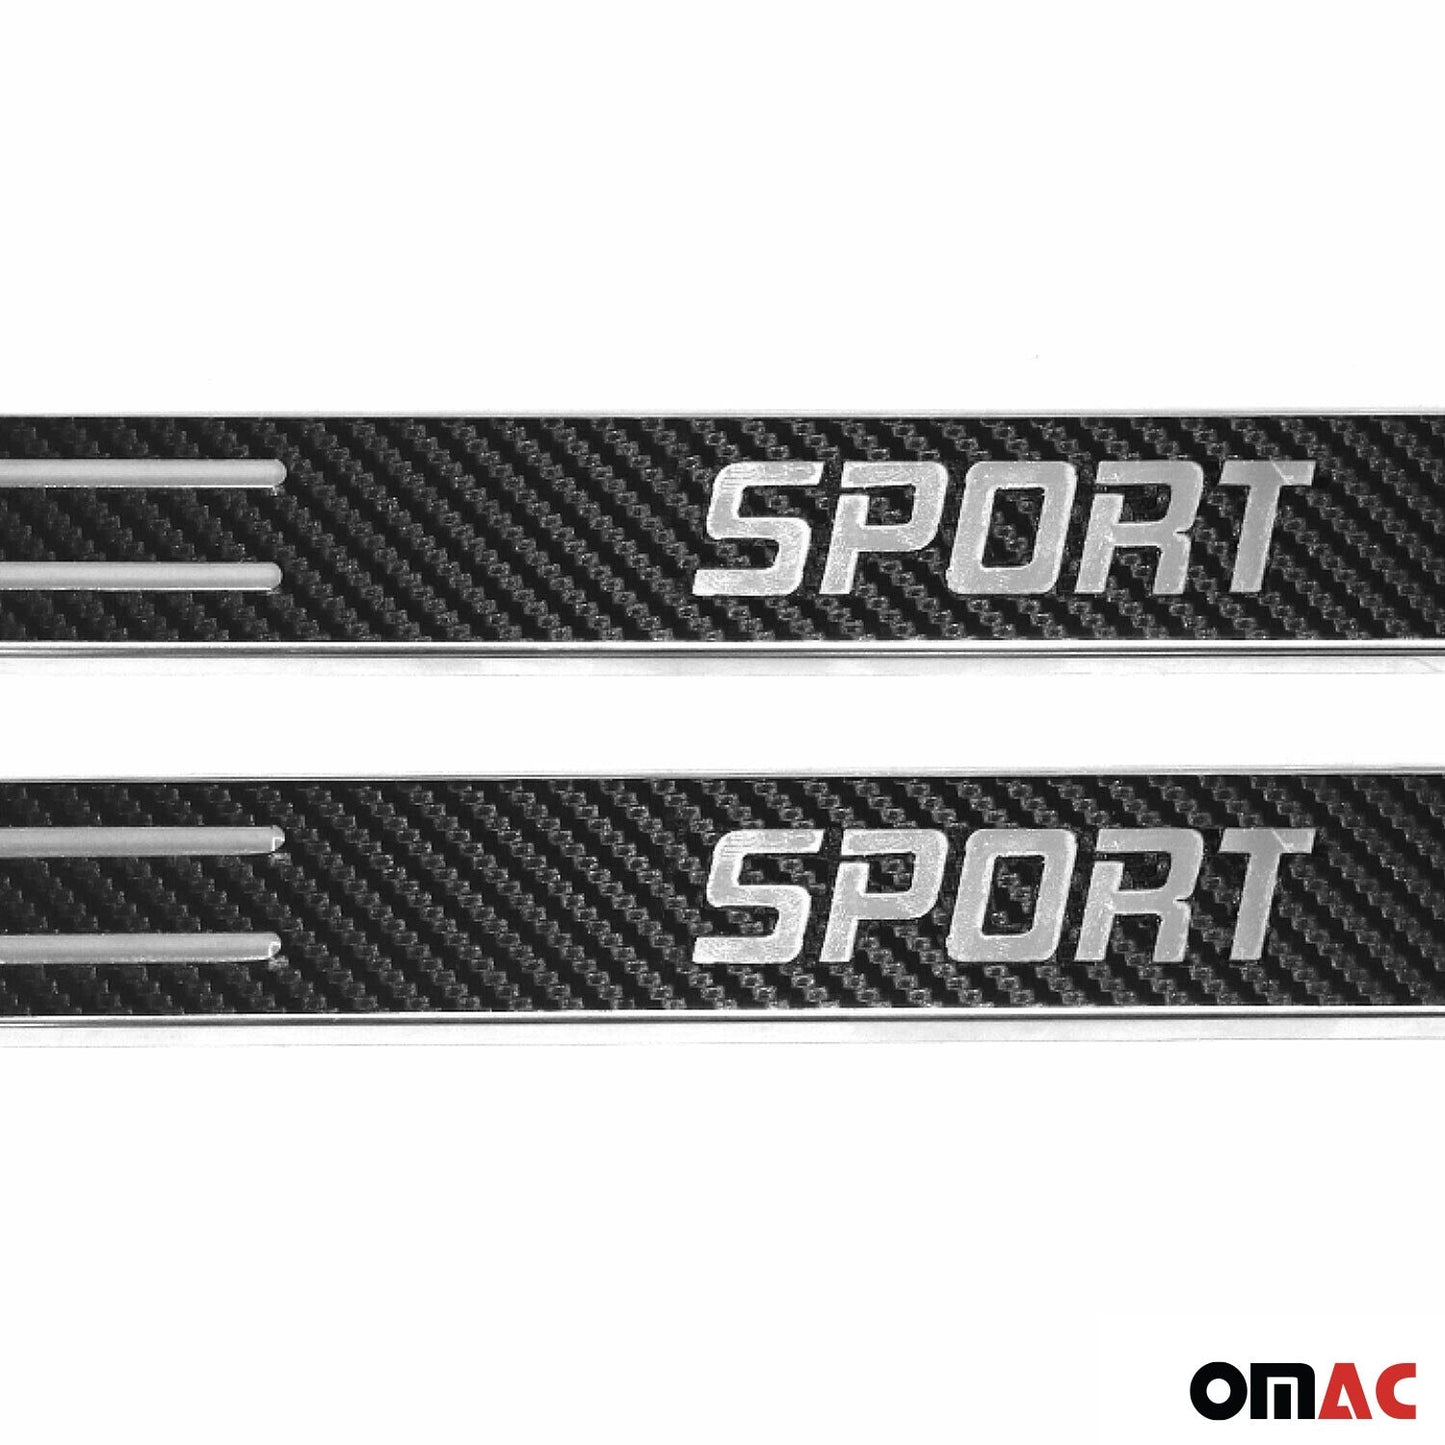 OMAC Carbon Foiled Door Sill Cover Trim Sport Steel 2 Pcs For BMW 1 Series 2011-2019 9696092CFS